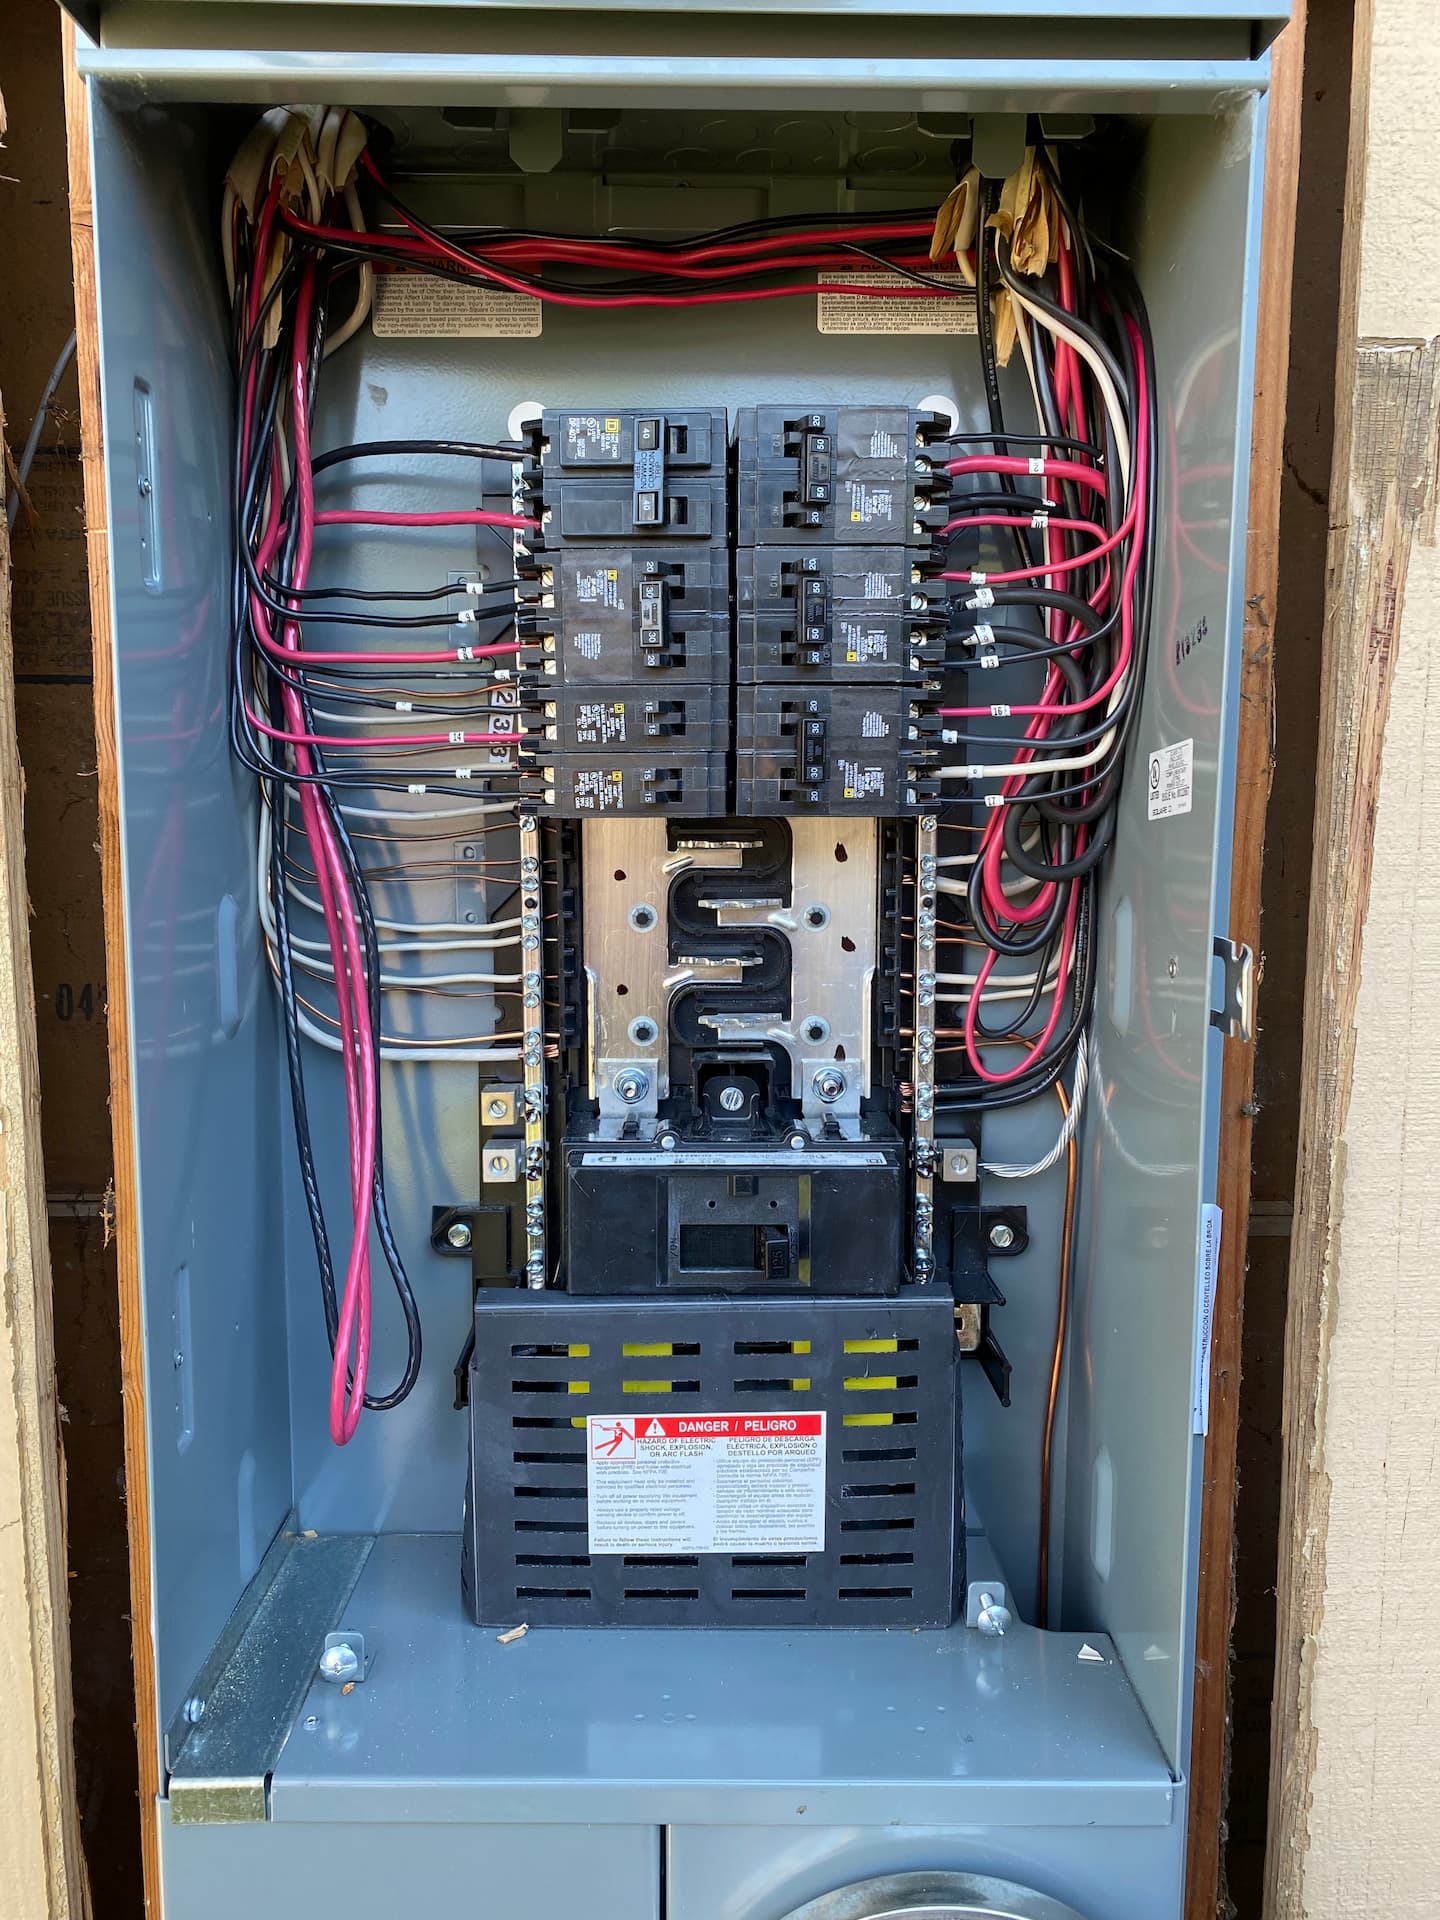 An electrical panel with the cover off, showing the wires inside.